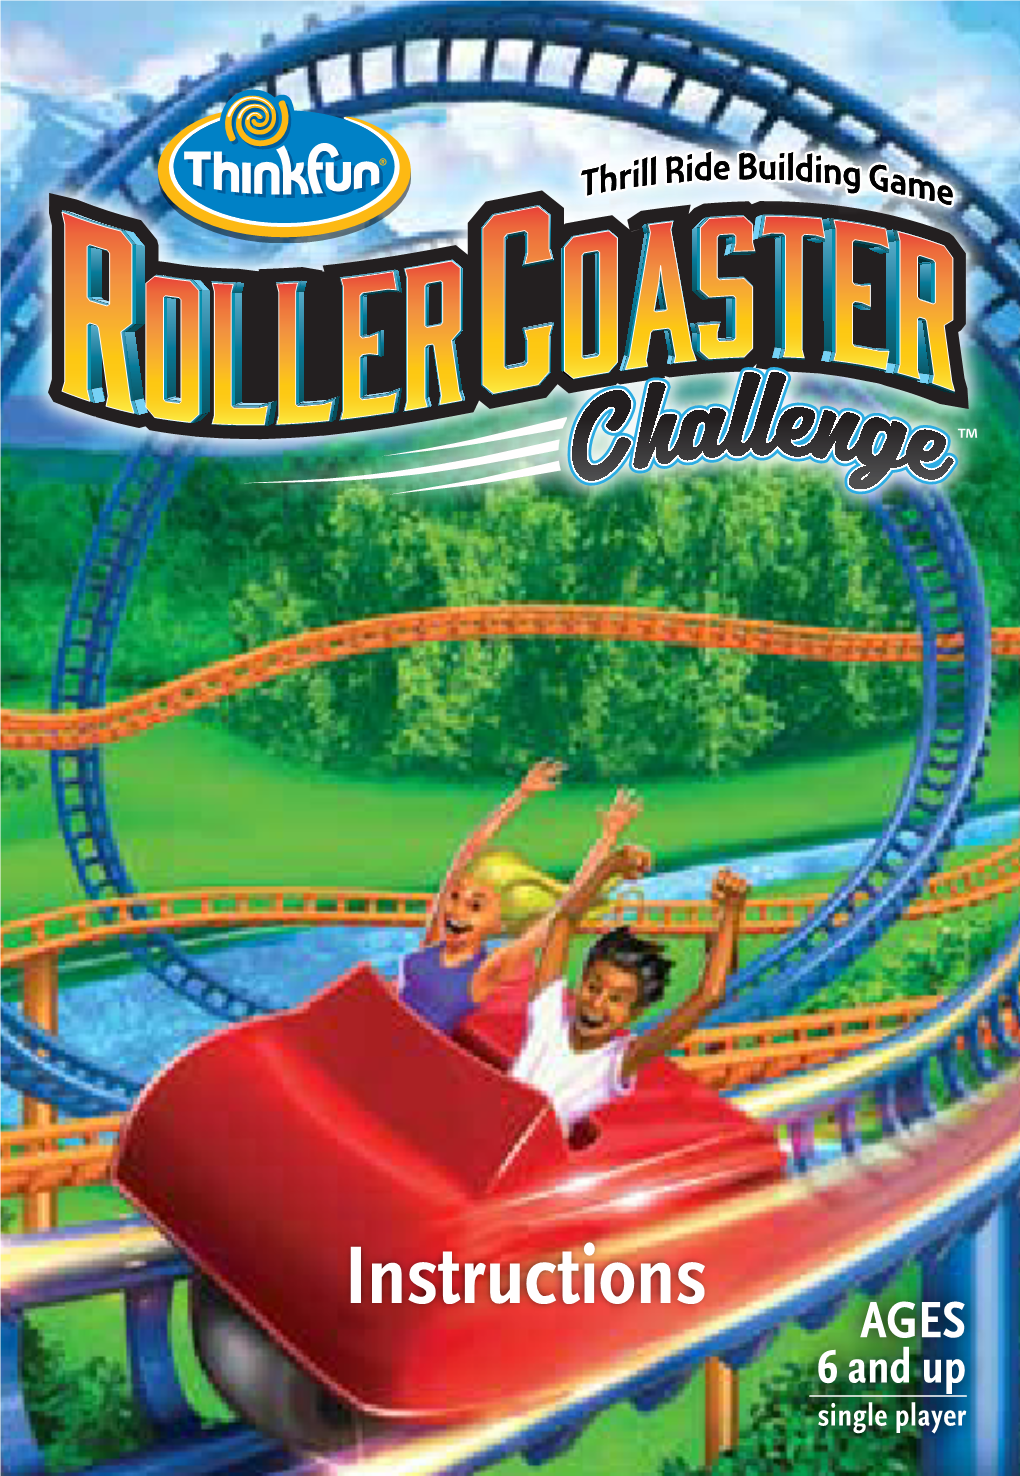 Roller Coaster Challenge Is the Game Where You Get to Build Your Very Own Roller Coasters! the 40 Challenges Will Have You Creating Some Thrilling Rides